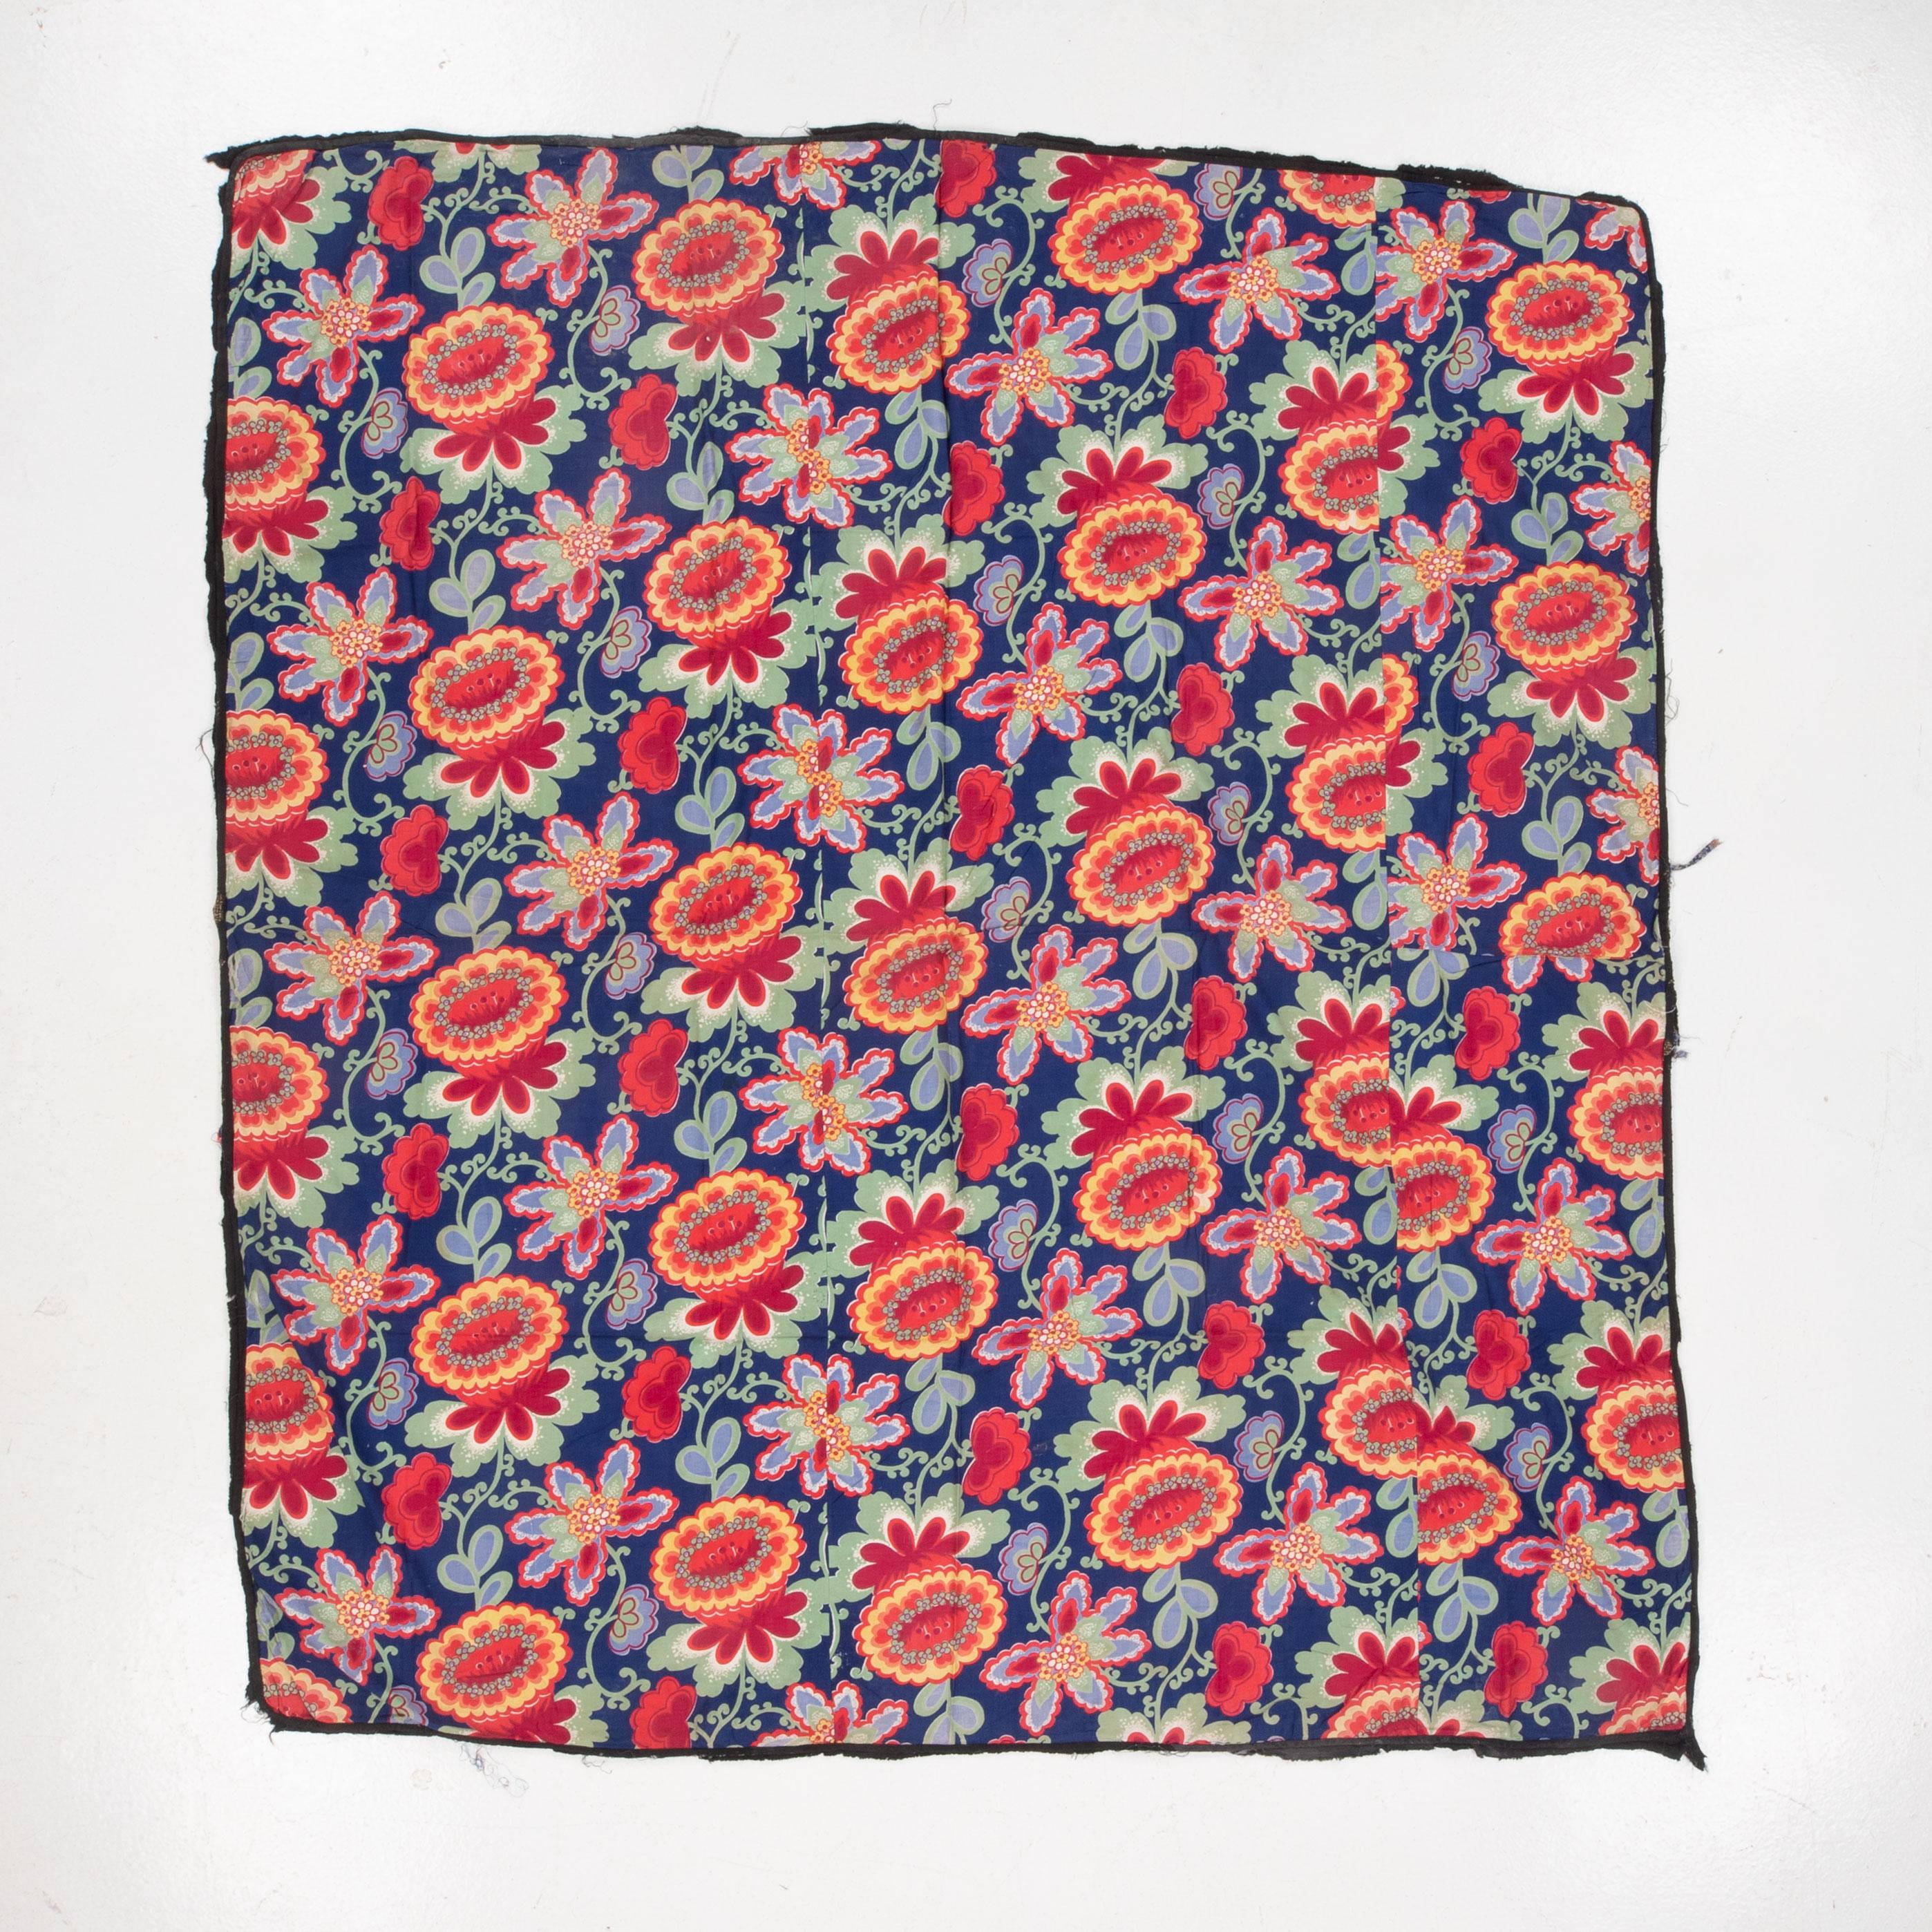 Russian roller-printed textiles from the mid-20th century held a distinctive place in the Central Asian market, embodying a vibrant fusion of artistic expression and utilitarian functionality. These textiles were characterized by their intricate and